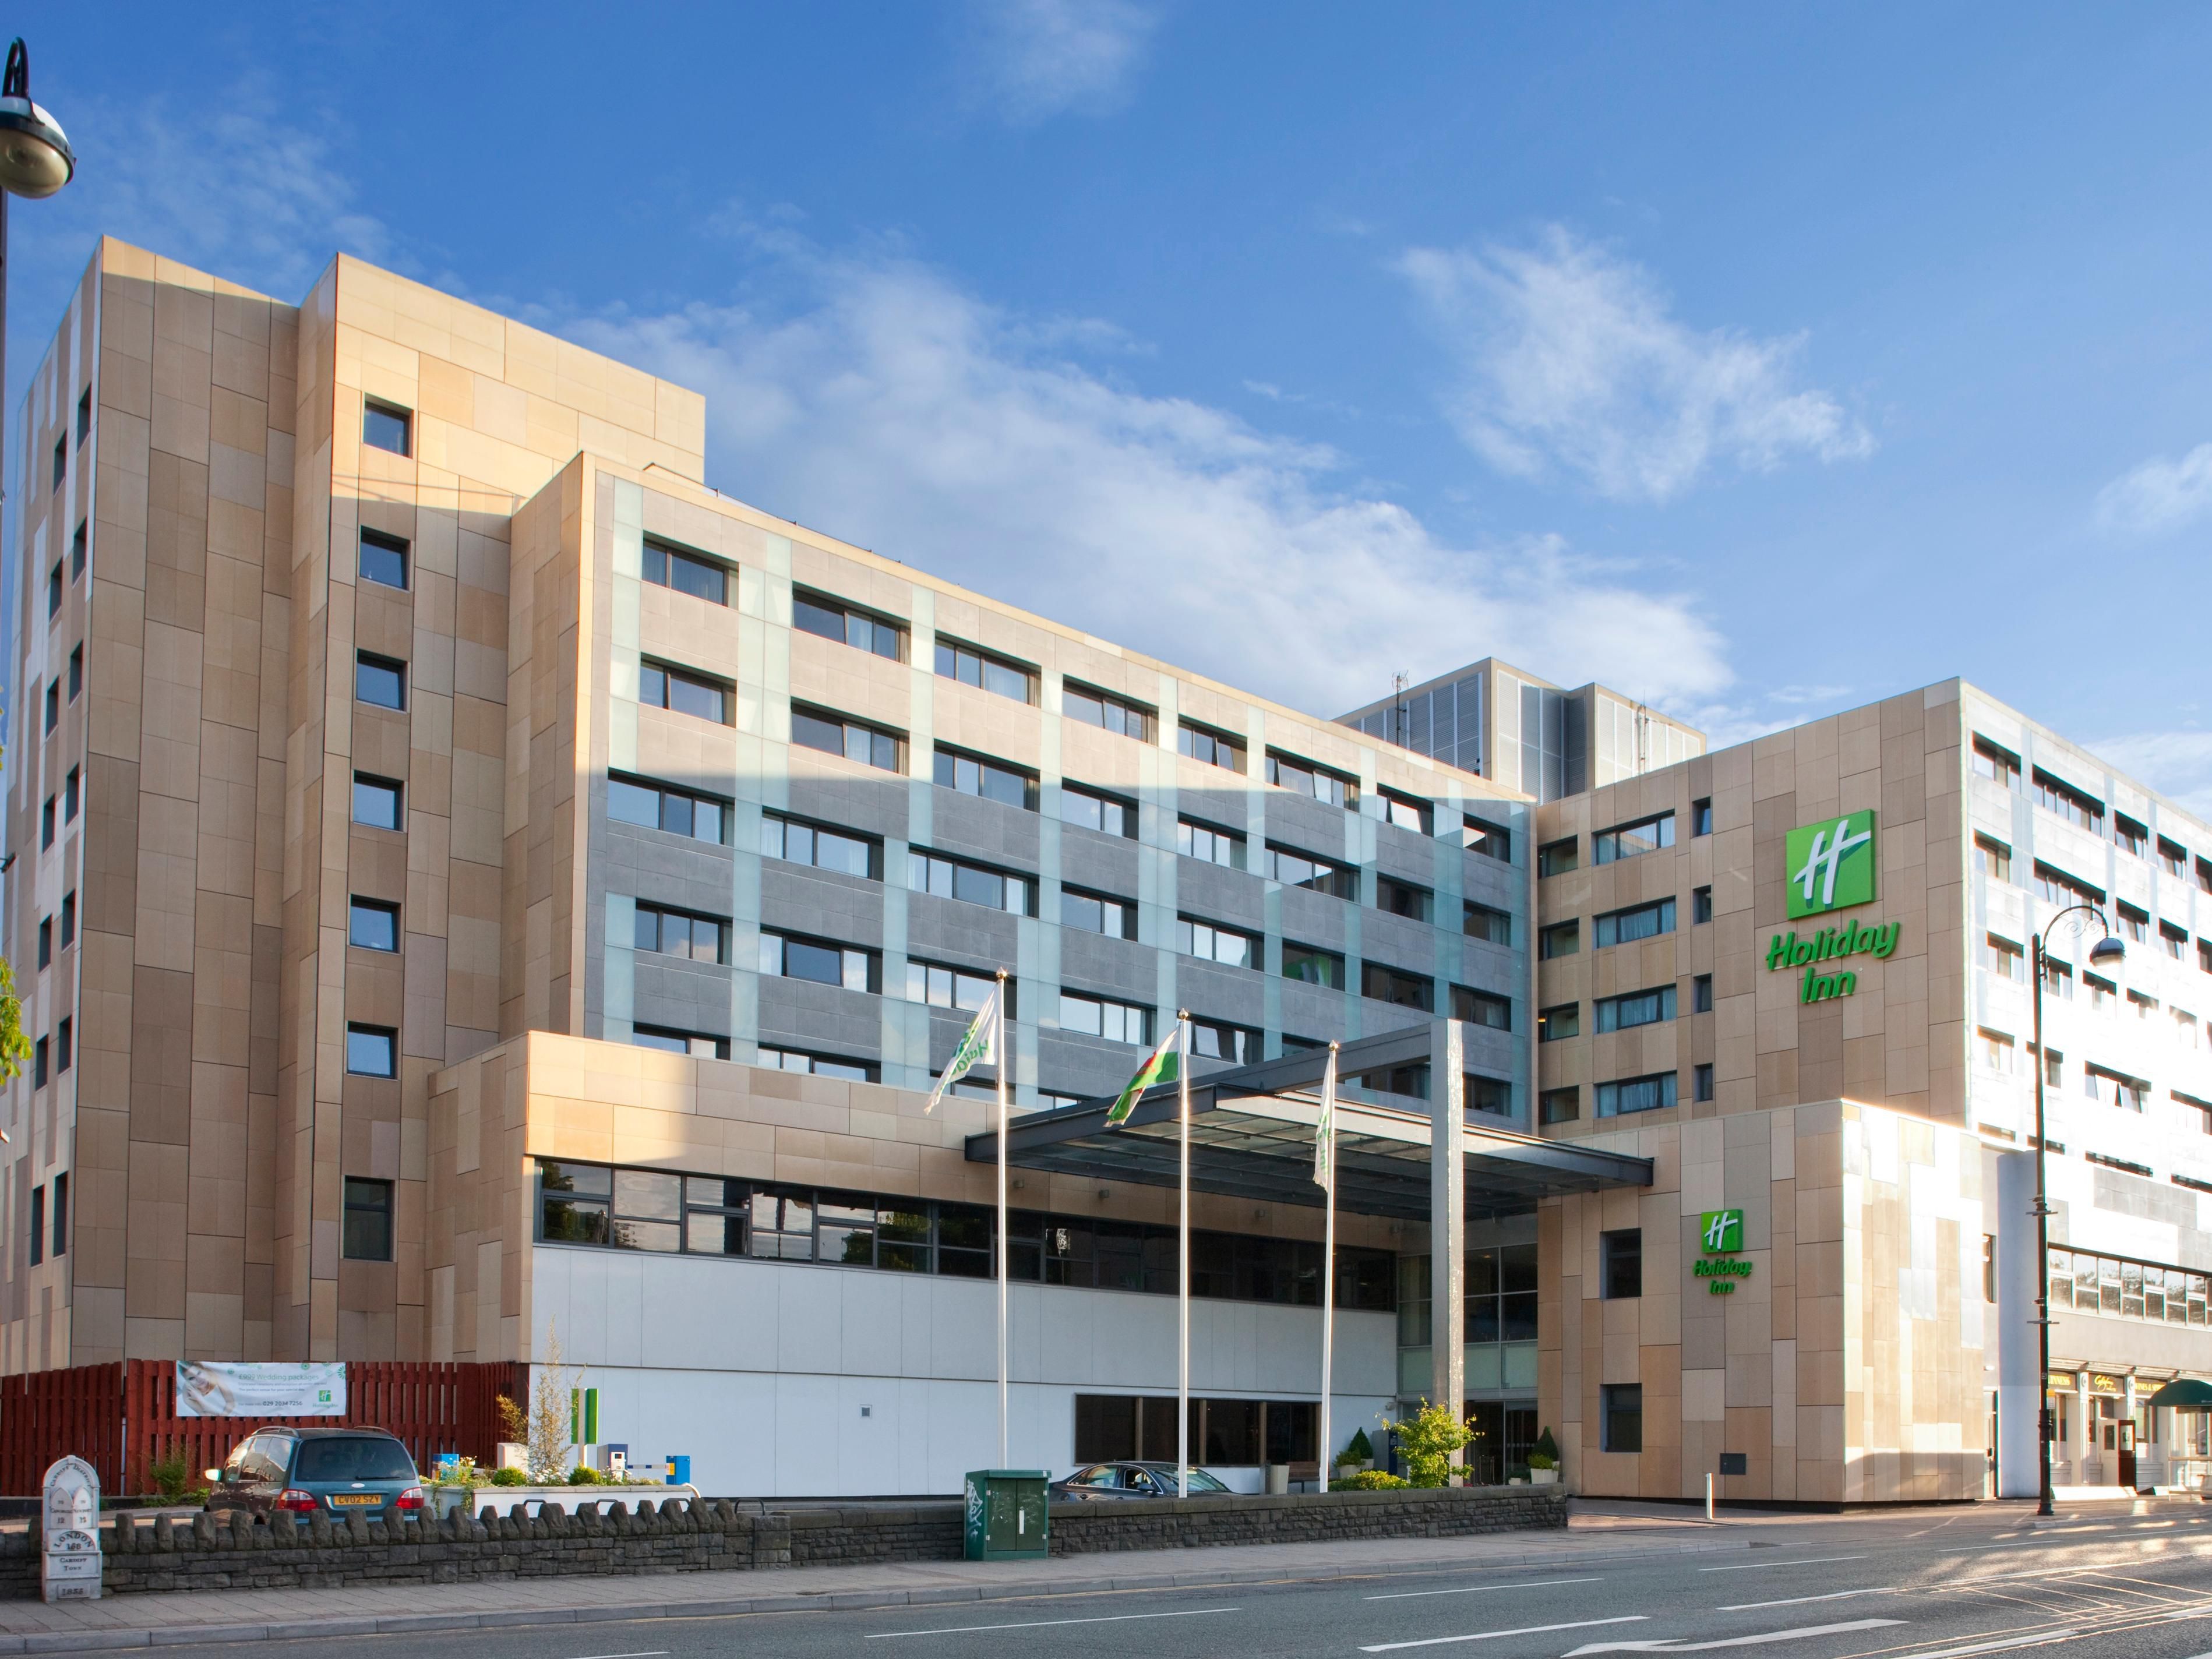 Just click on the link for a chance to visit Holiday Inn Cardiff City Centre virtually with a fully interactive, virtual tour. Move through the hotel exploring the open lobby, restaurant, meeting space, and bedrooms.